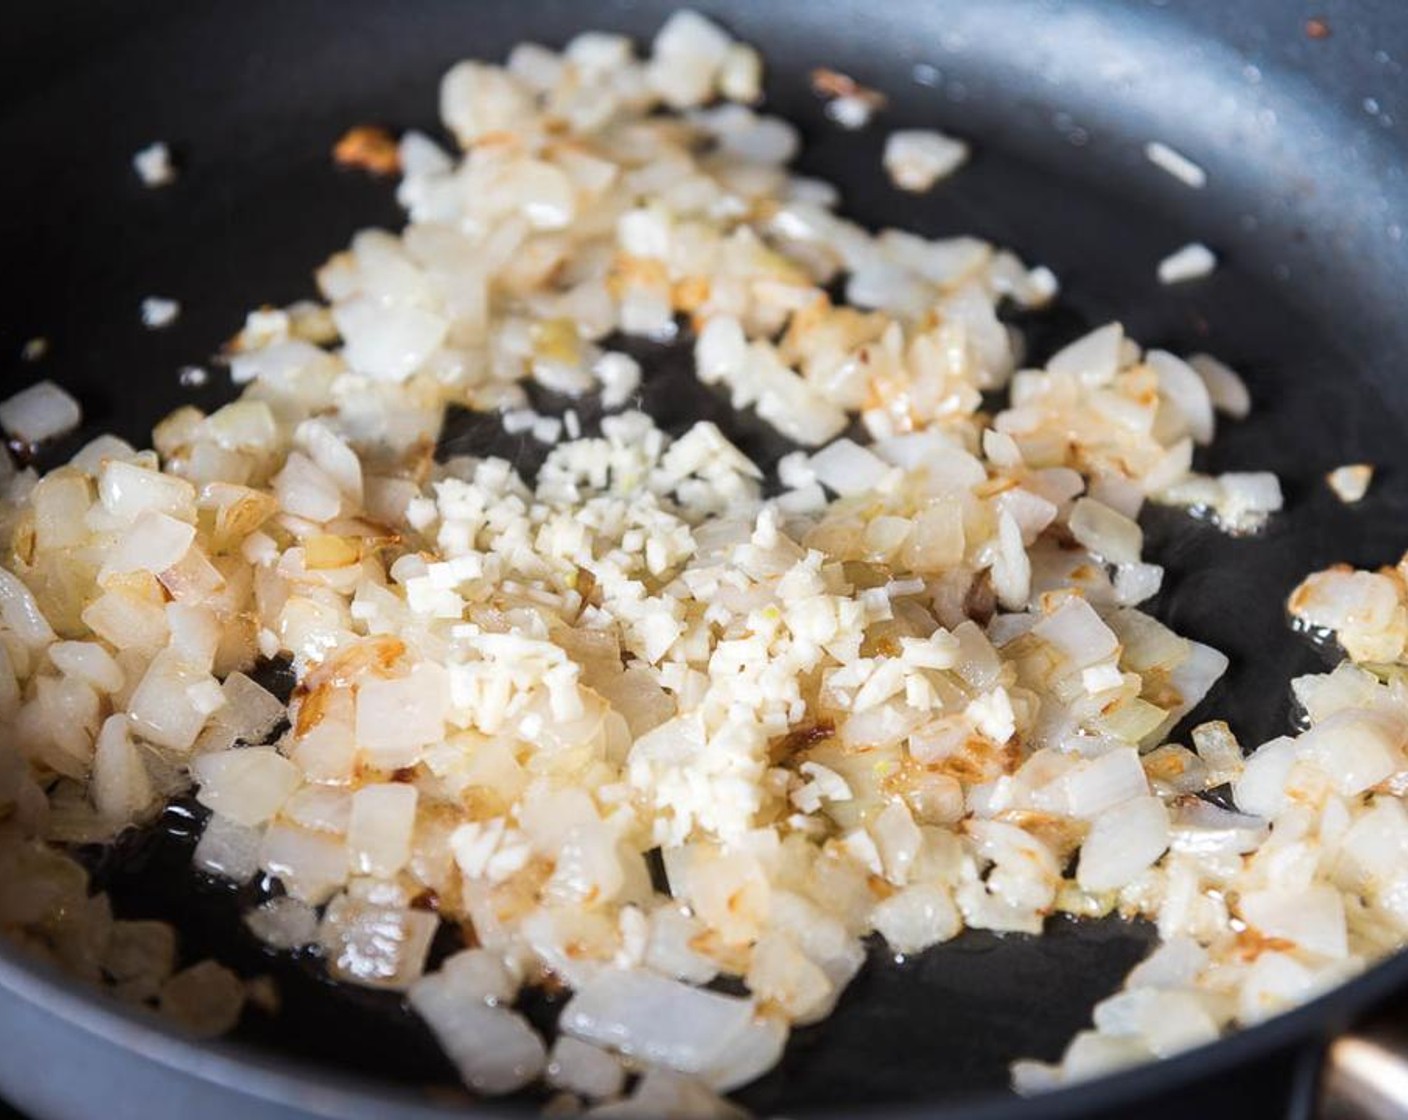 step 2 Heat Peanut Oil (2 Tbsp) in a large skillet over medium heat until warm. Mince the White Onion (1) and add to the skillet.  Cook and stir until translucent and the edges are lightly brown for 8 to 15 minutes.